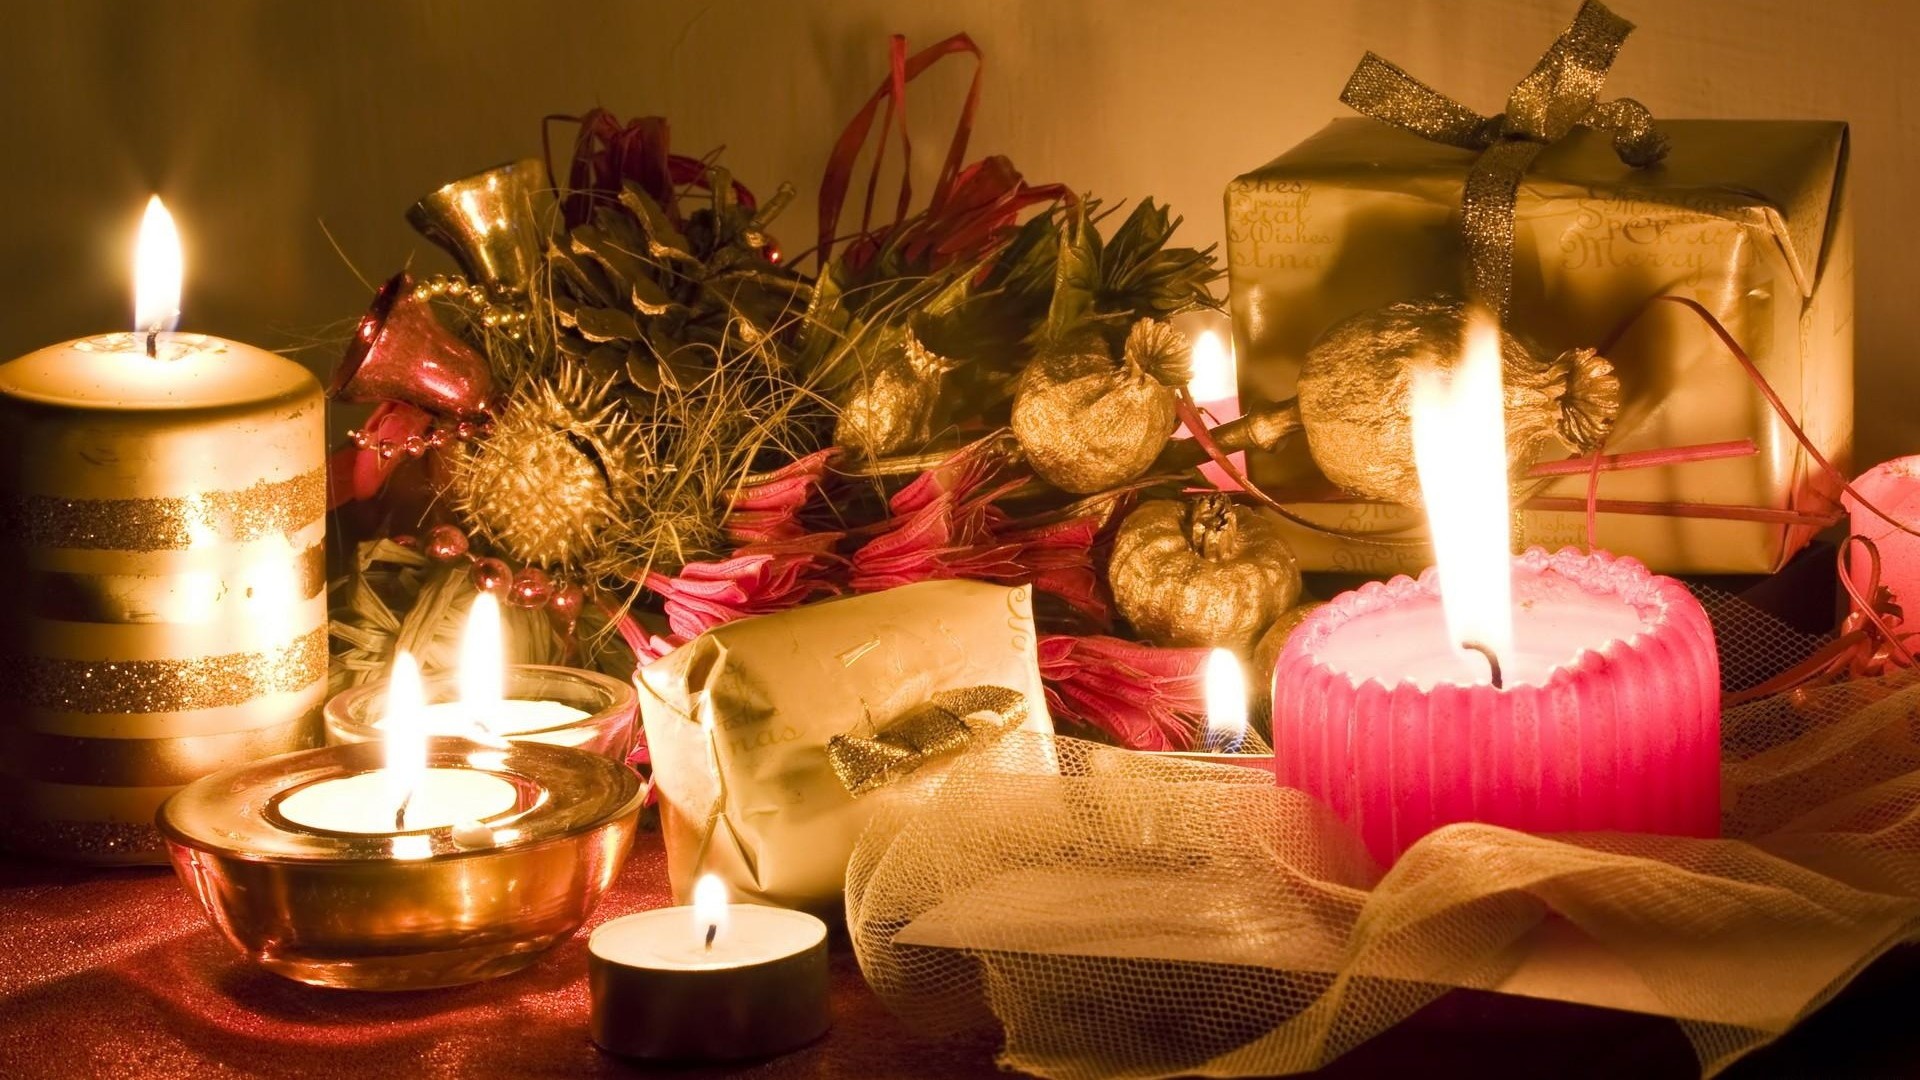 1920x1080  Wallpaper candles, table, gifts, new year, christmas, mood,  holiday